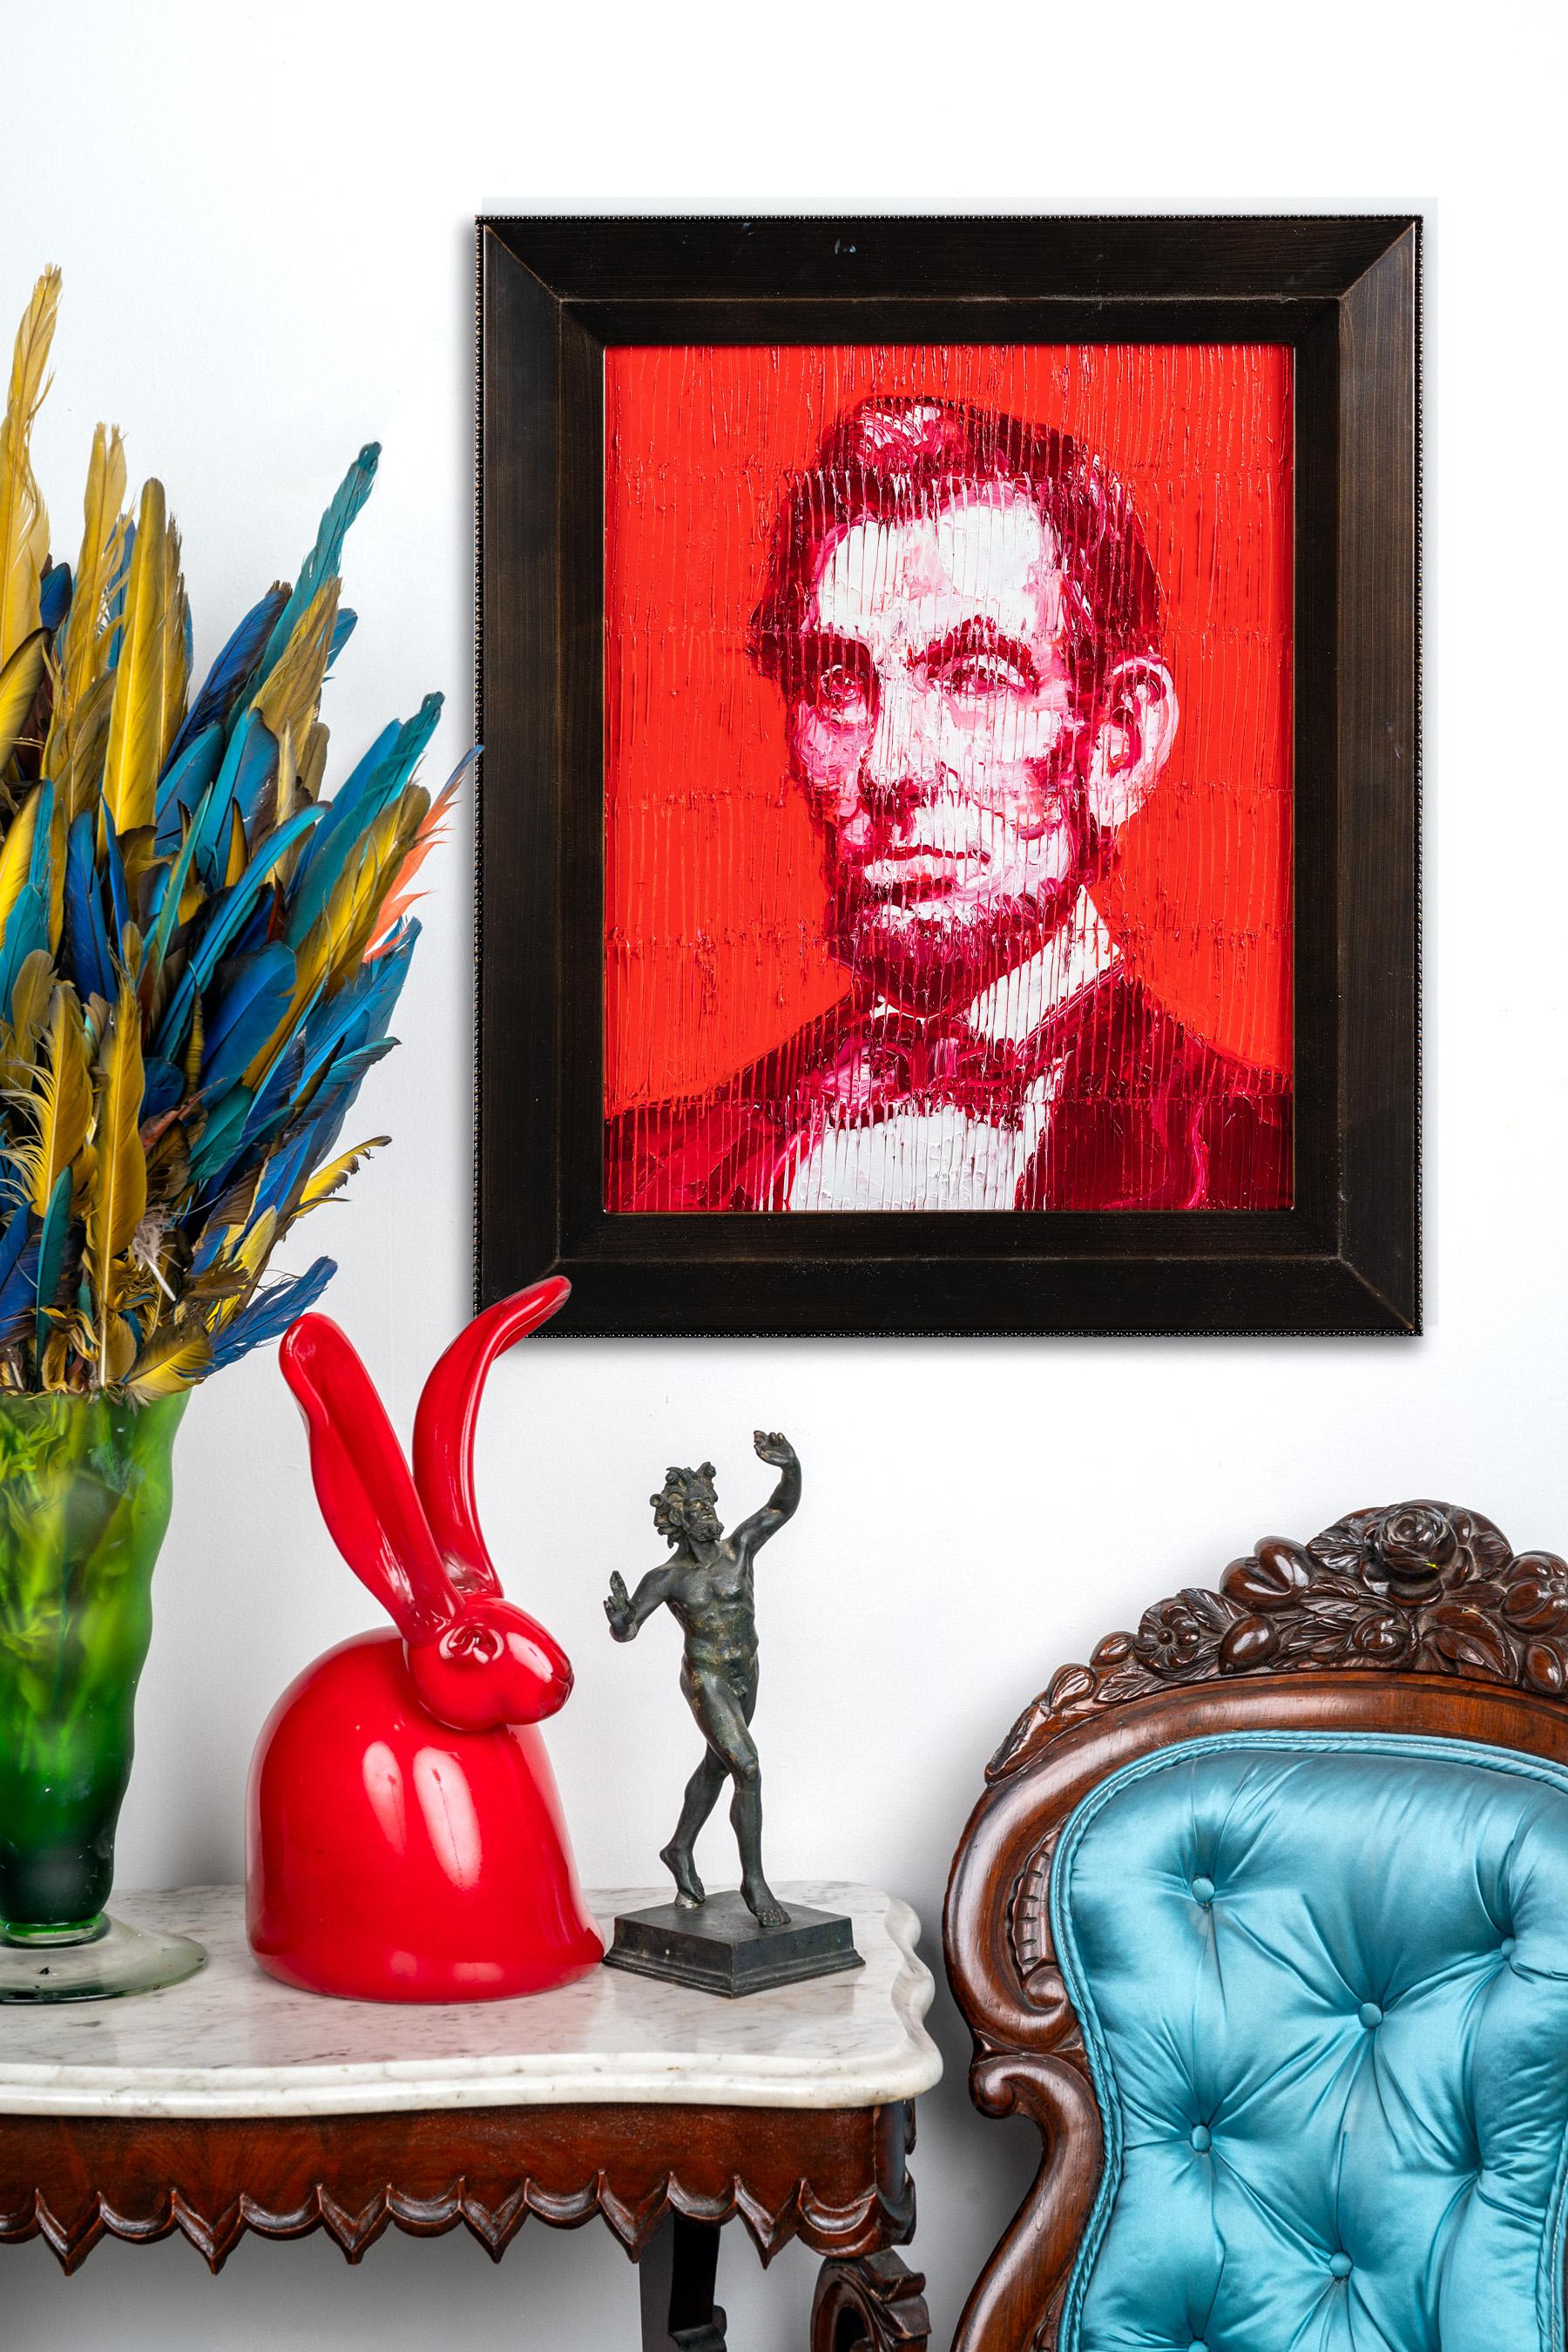 This exquisitely textured portrait of the famed president Abraham Lincoln captures his serious yet sincere visage. Created by artist Hunt Slonem, this work comes framed in a vintage-style frame made of dark wood, off setting the hues of the